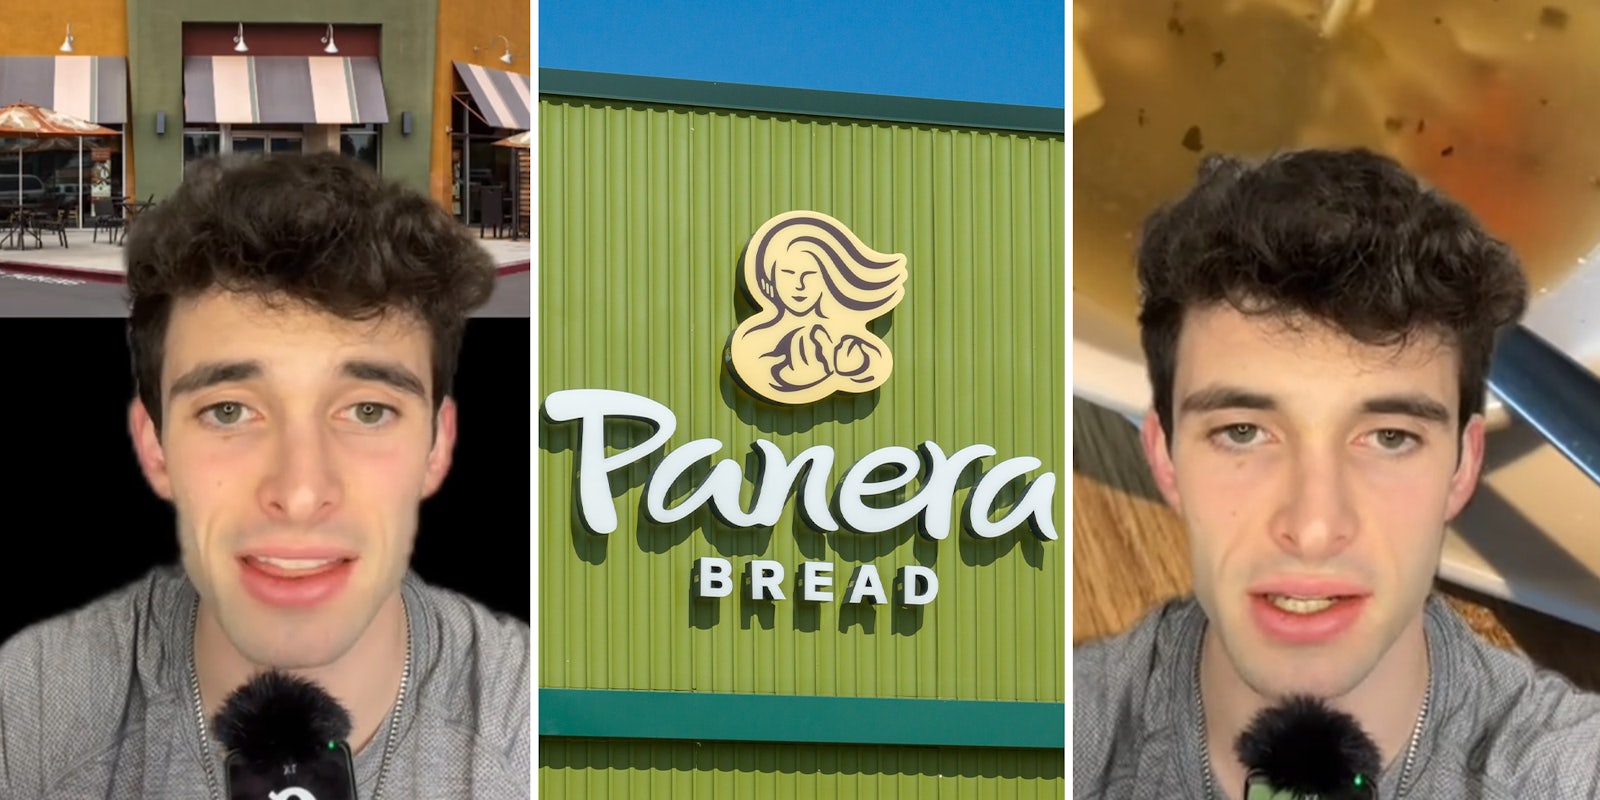 Customer has a theory for why he claims Panera Bread went down in quality